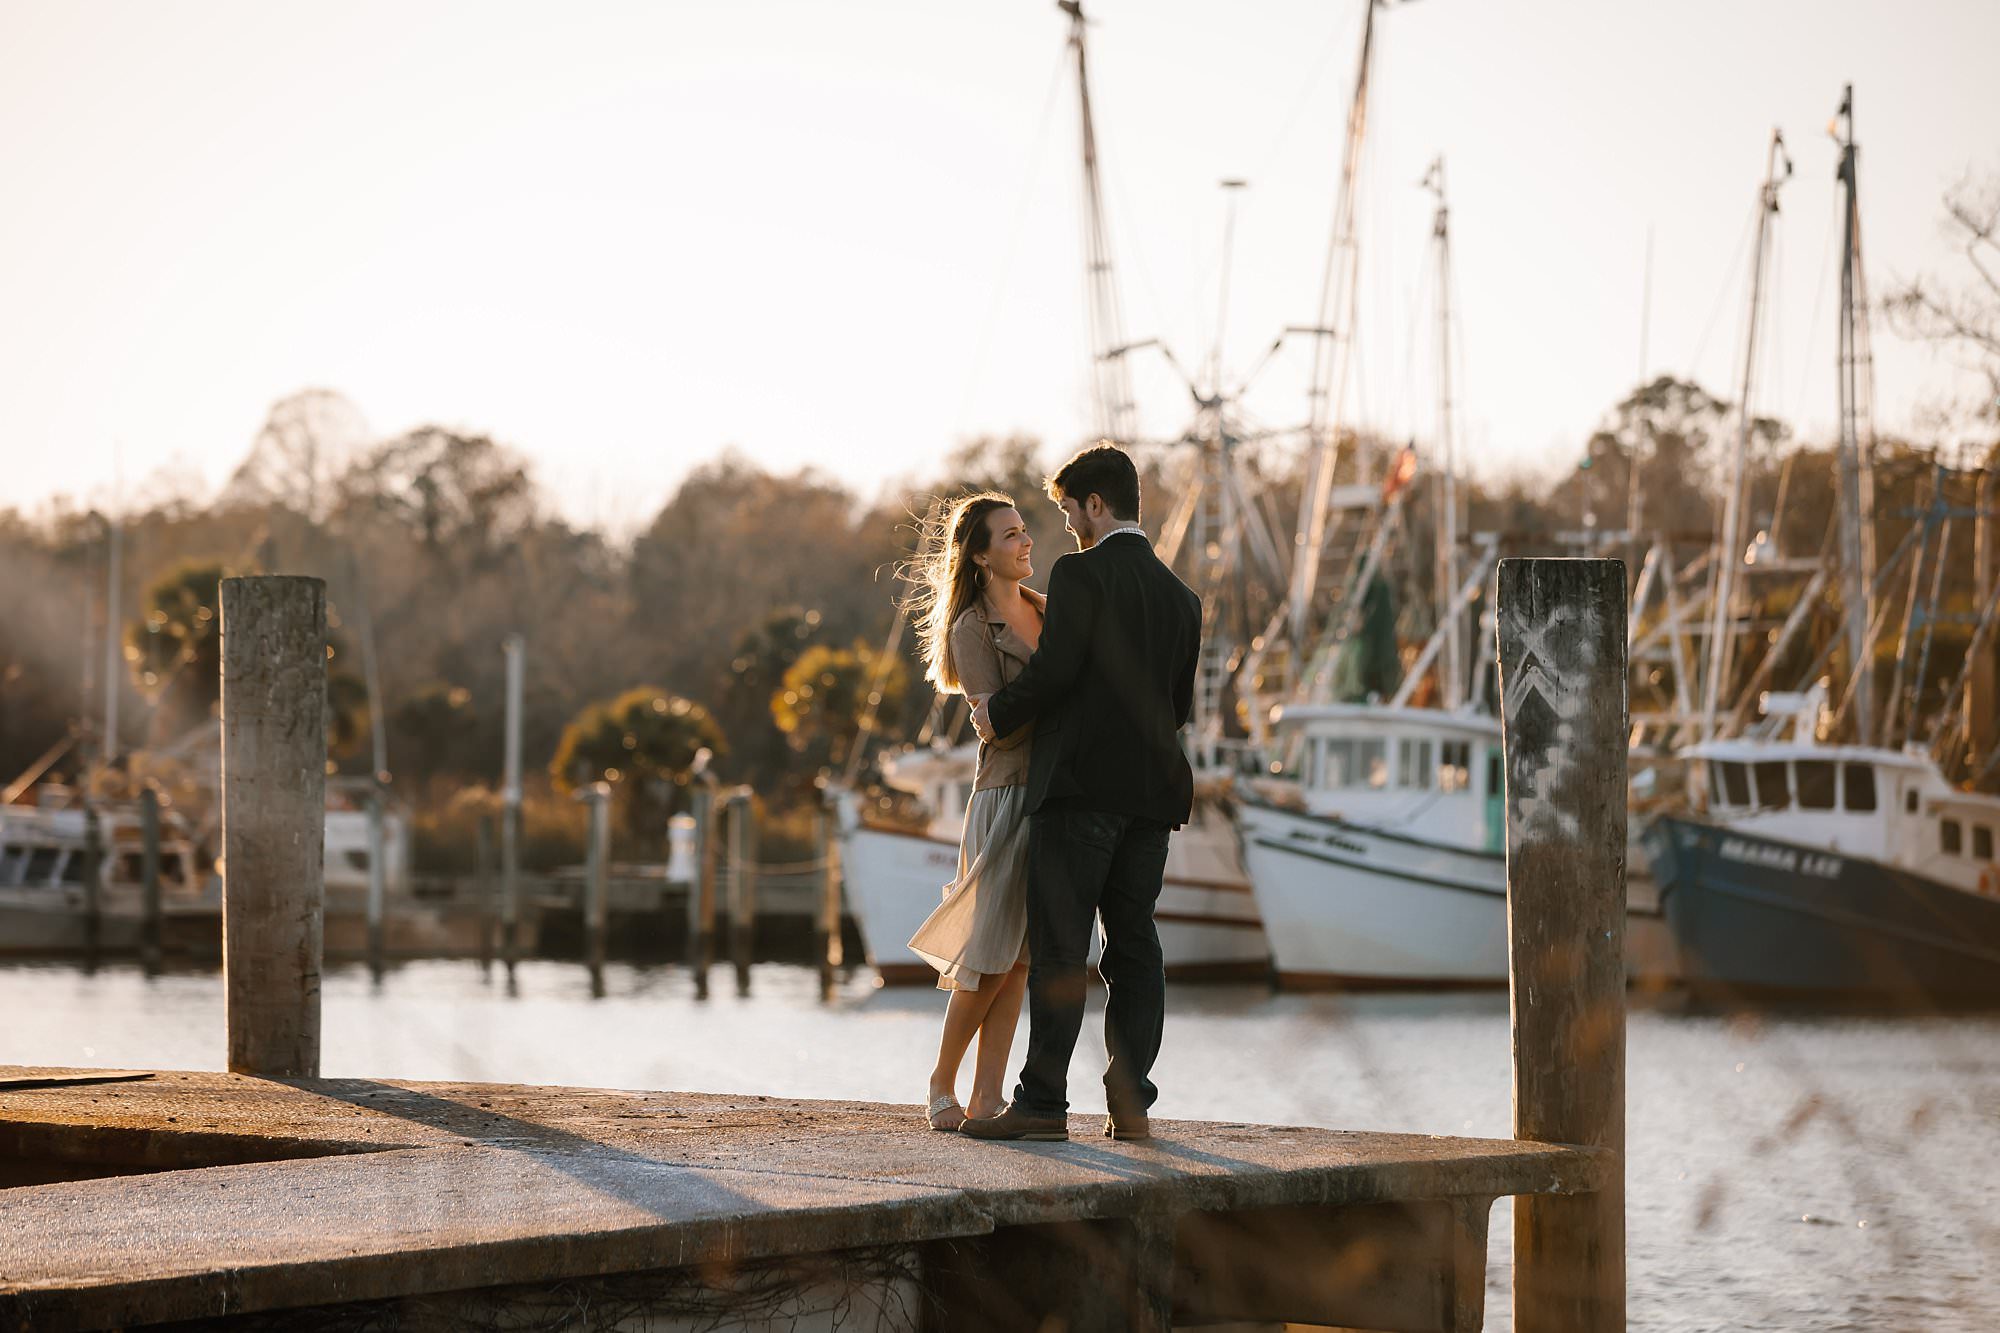 Megan and Turner embracing on the dock backlit by the sun hair blowing in the wind